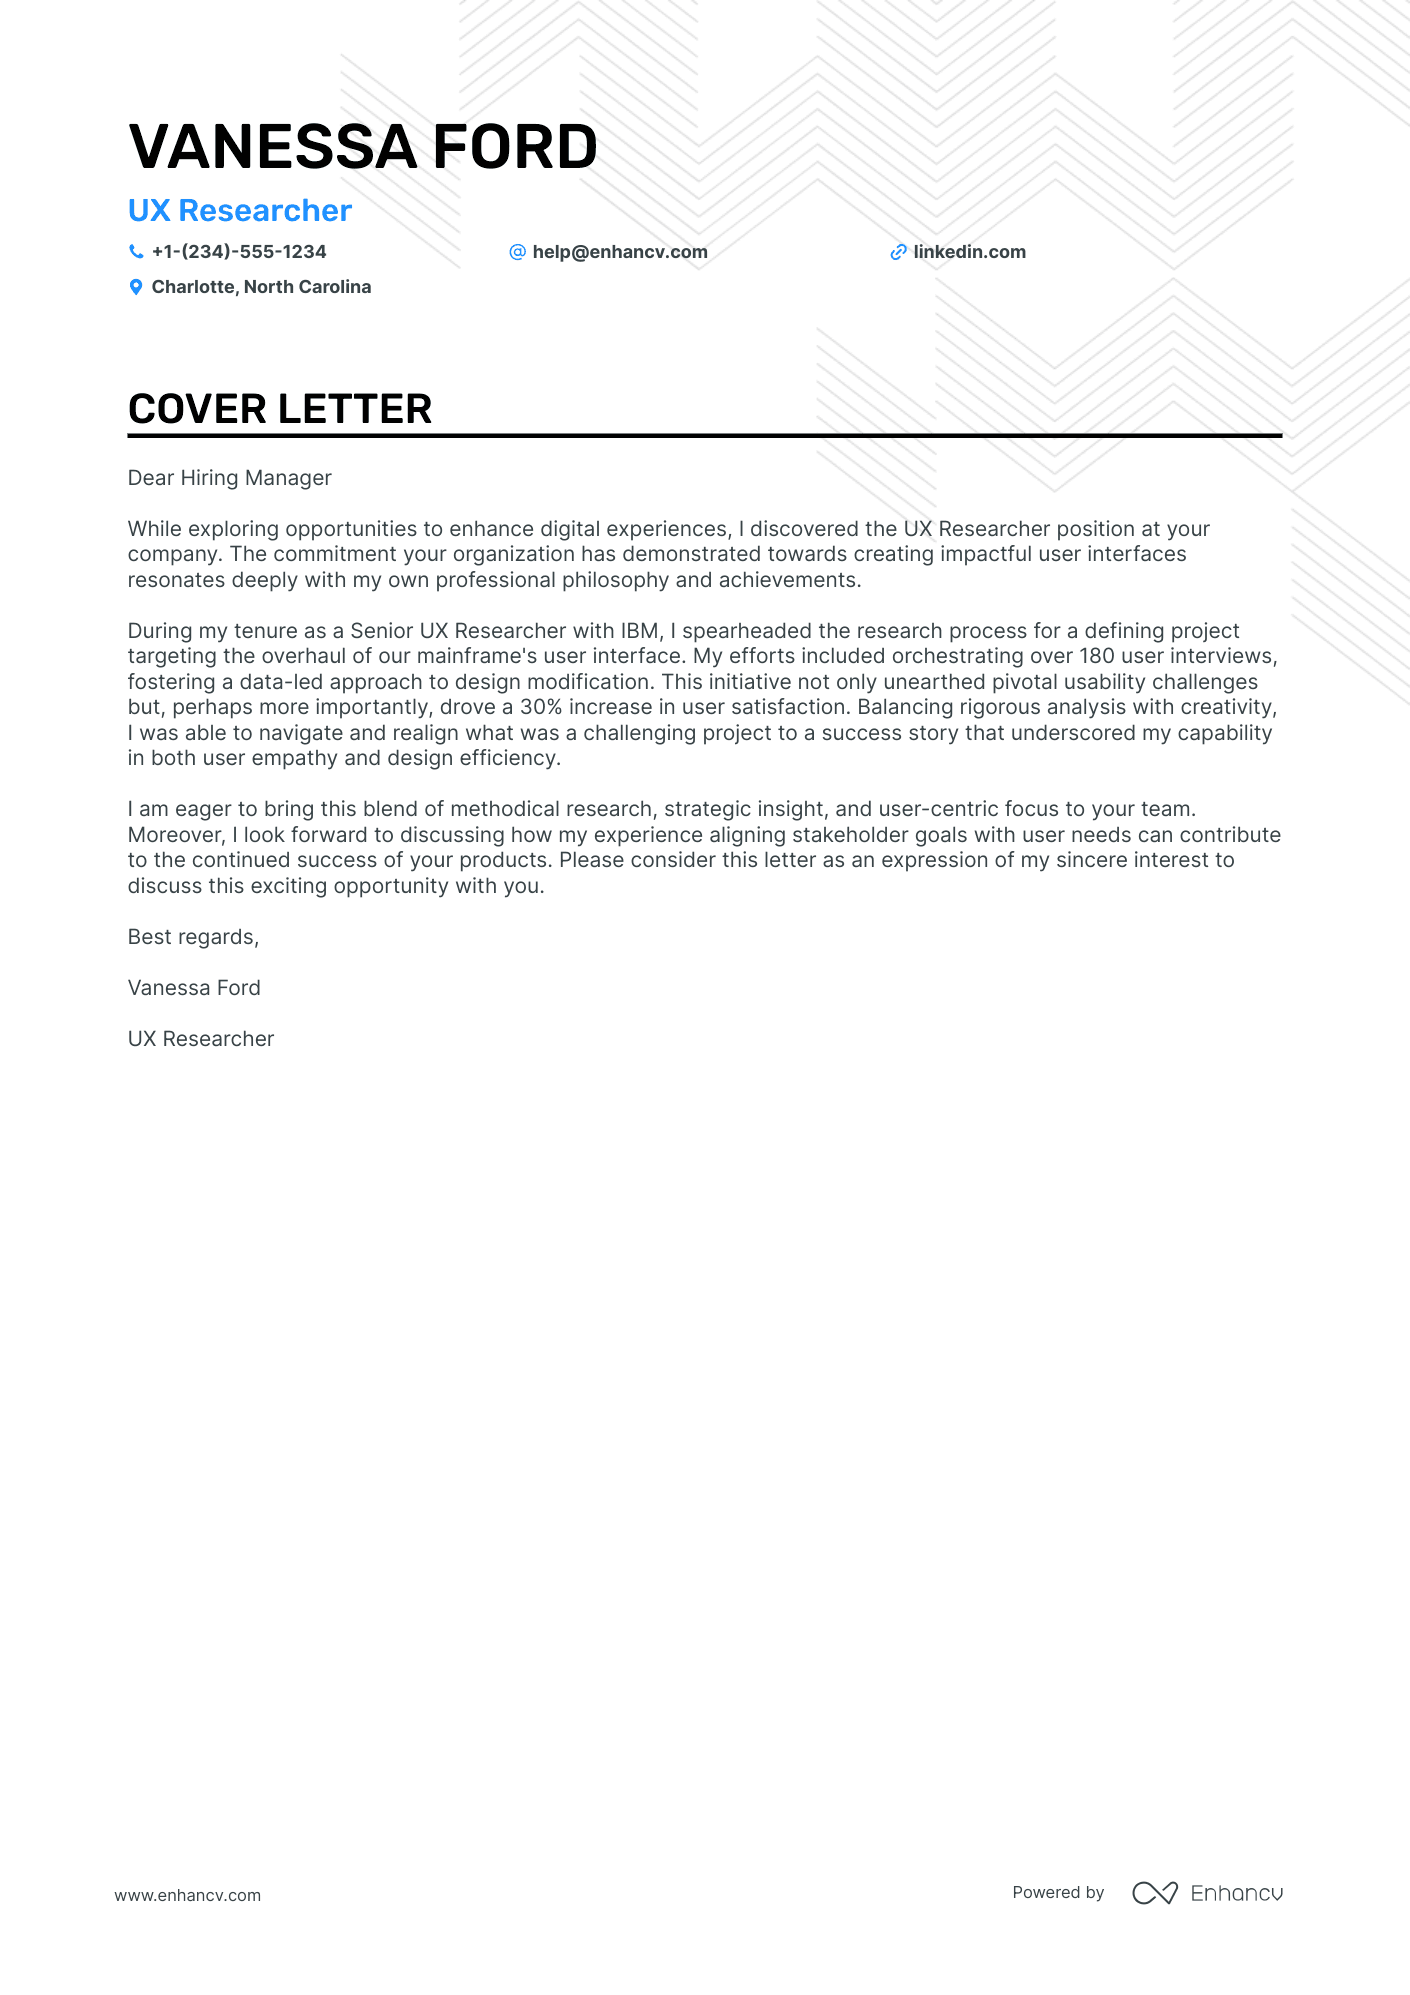 UX Researcher cover letter